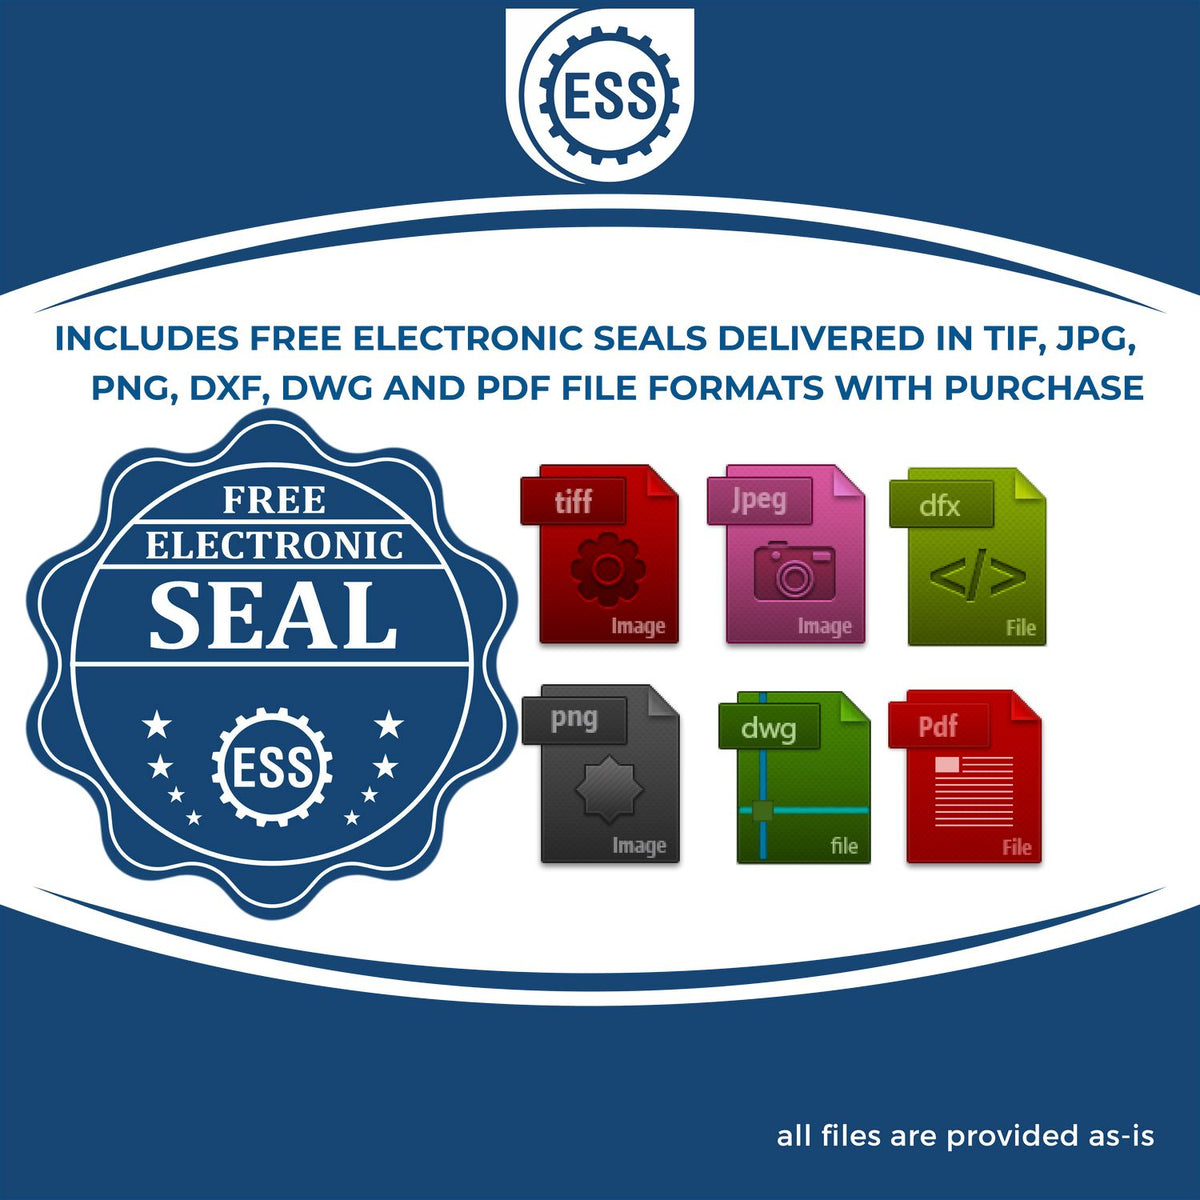 An infographic for the free electronic seal for the Arizona Professional Geologist Seal Stamp illustrating the different file type icons such as DXF, DWG, TIF, JPG and PNG.